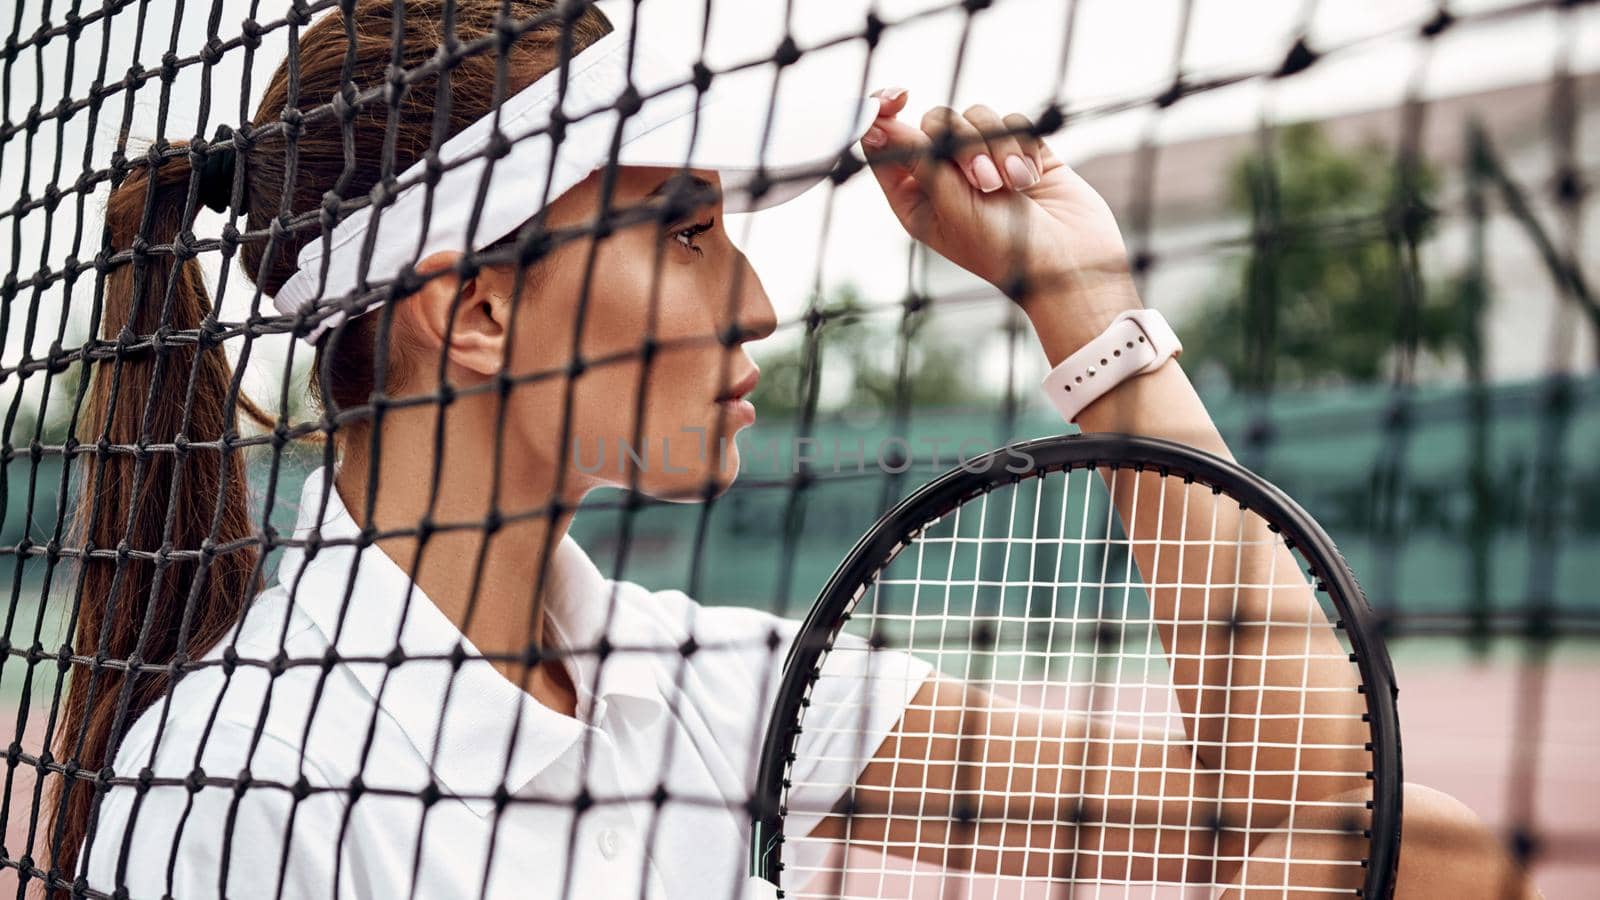 Portrait of young beautiful tennis player with a racket on a court by friendsstock